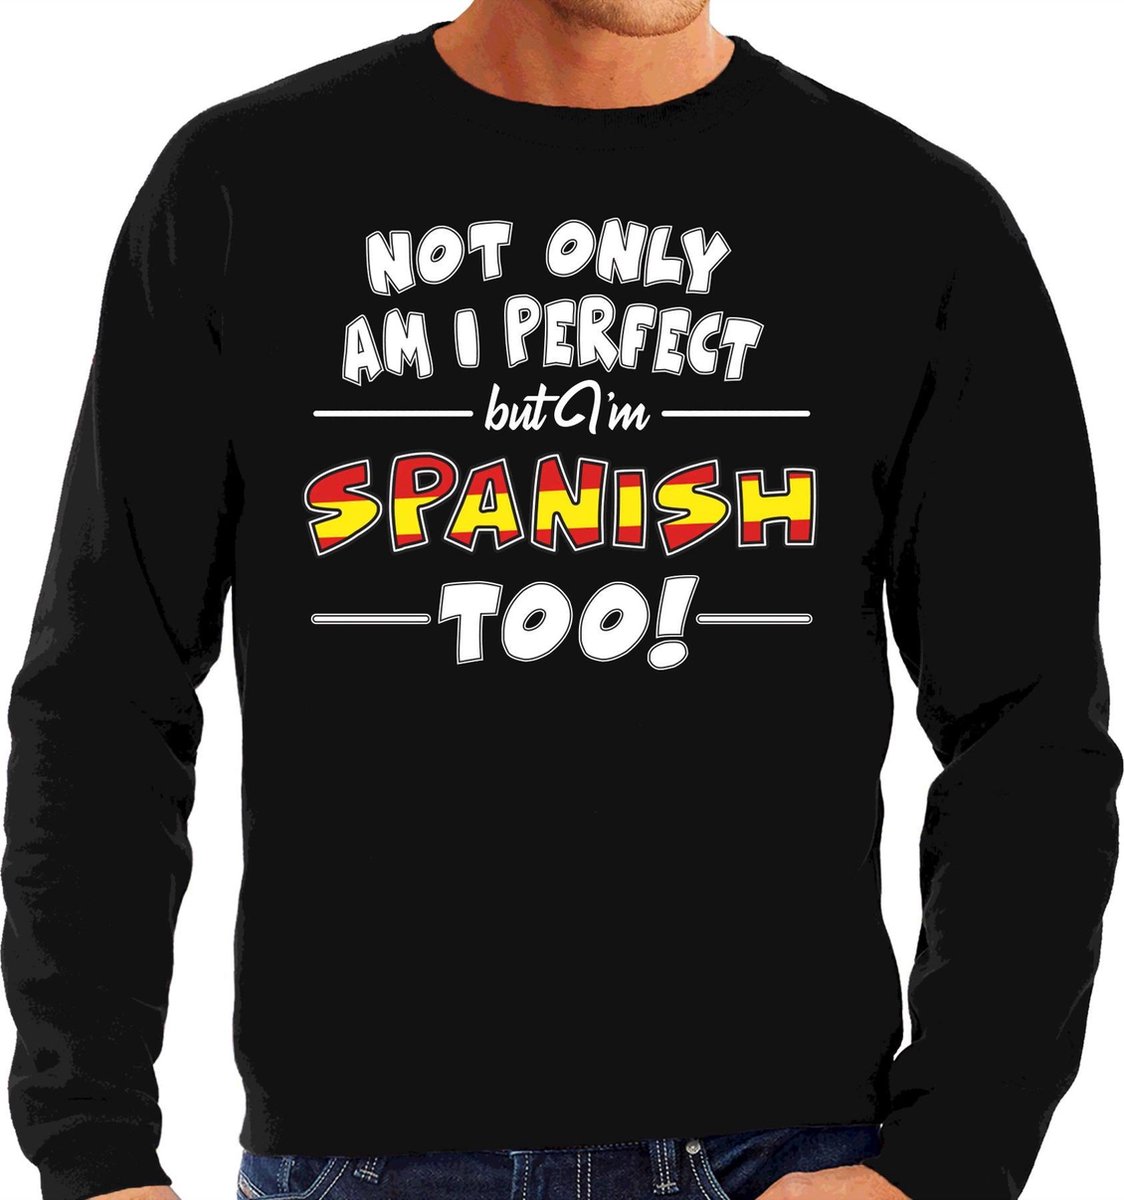 Not only am I perfect but im Spanish / Spaans too sweater - heren - zwart - Spanje cadeau trui S